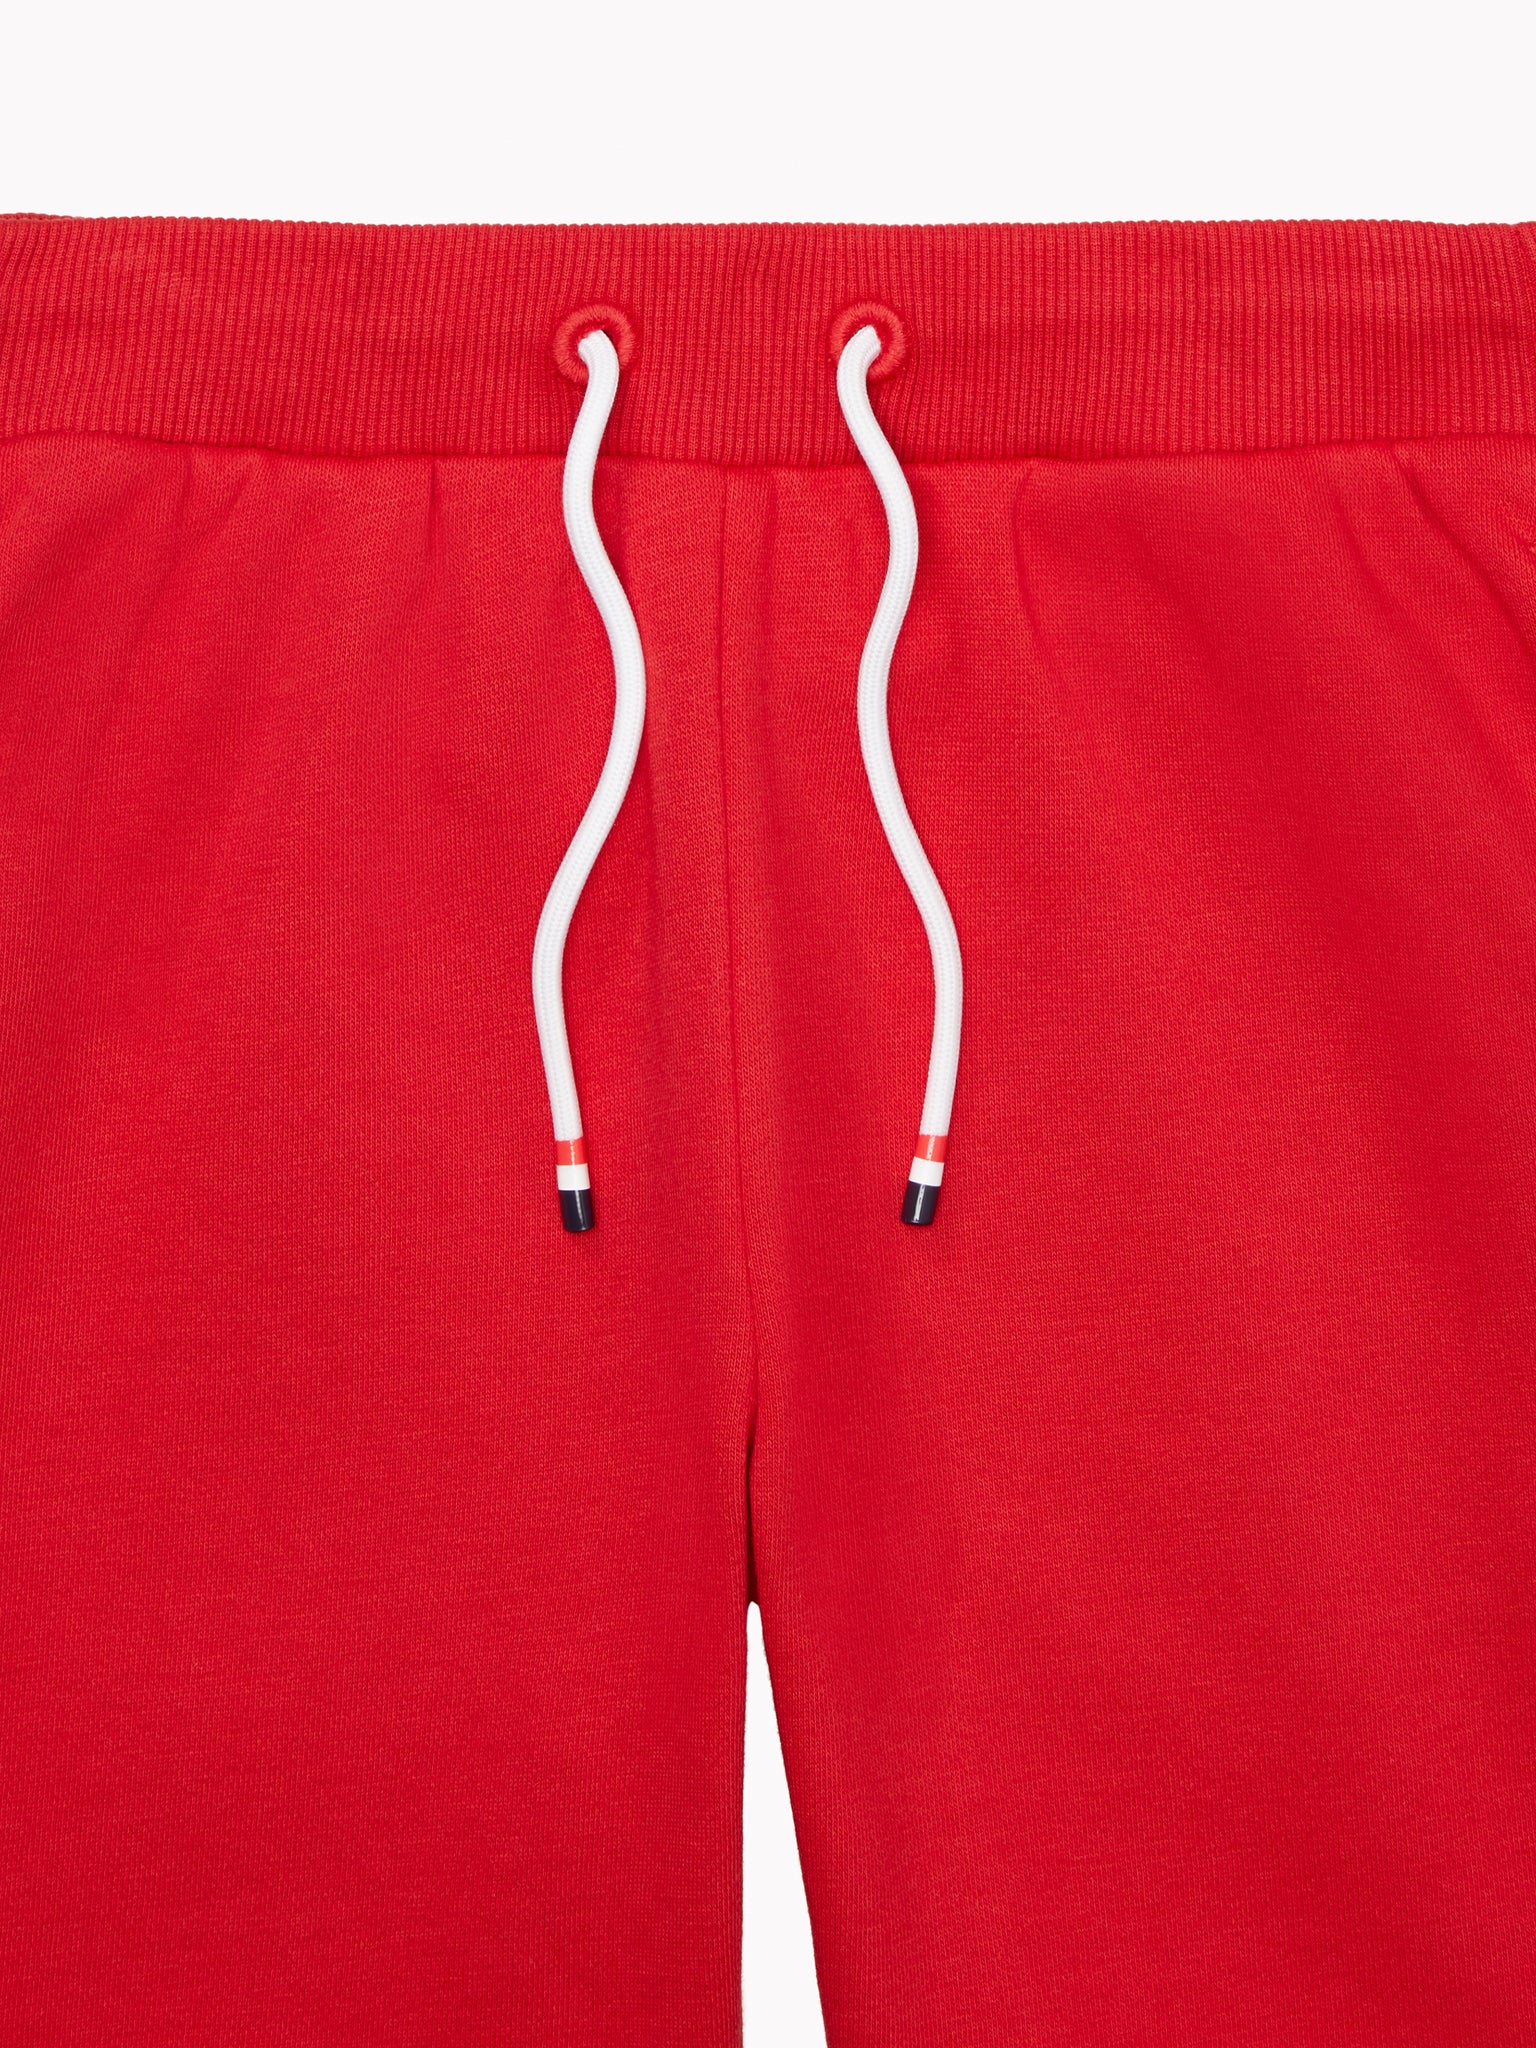 Essential Shorts (Kids) - Apple Red